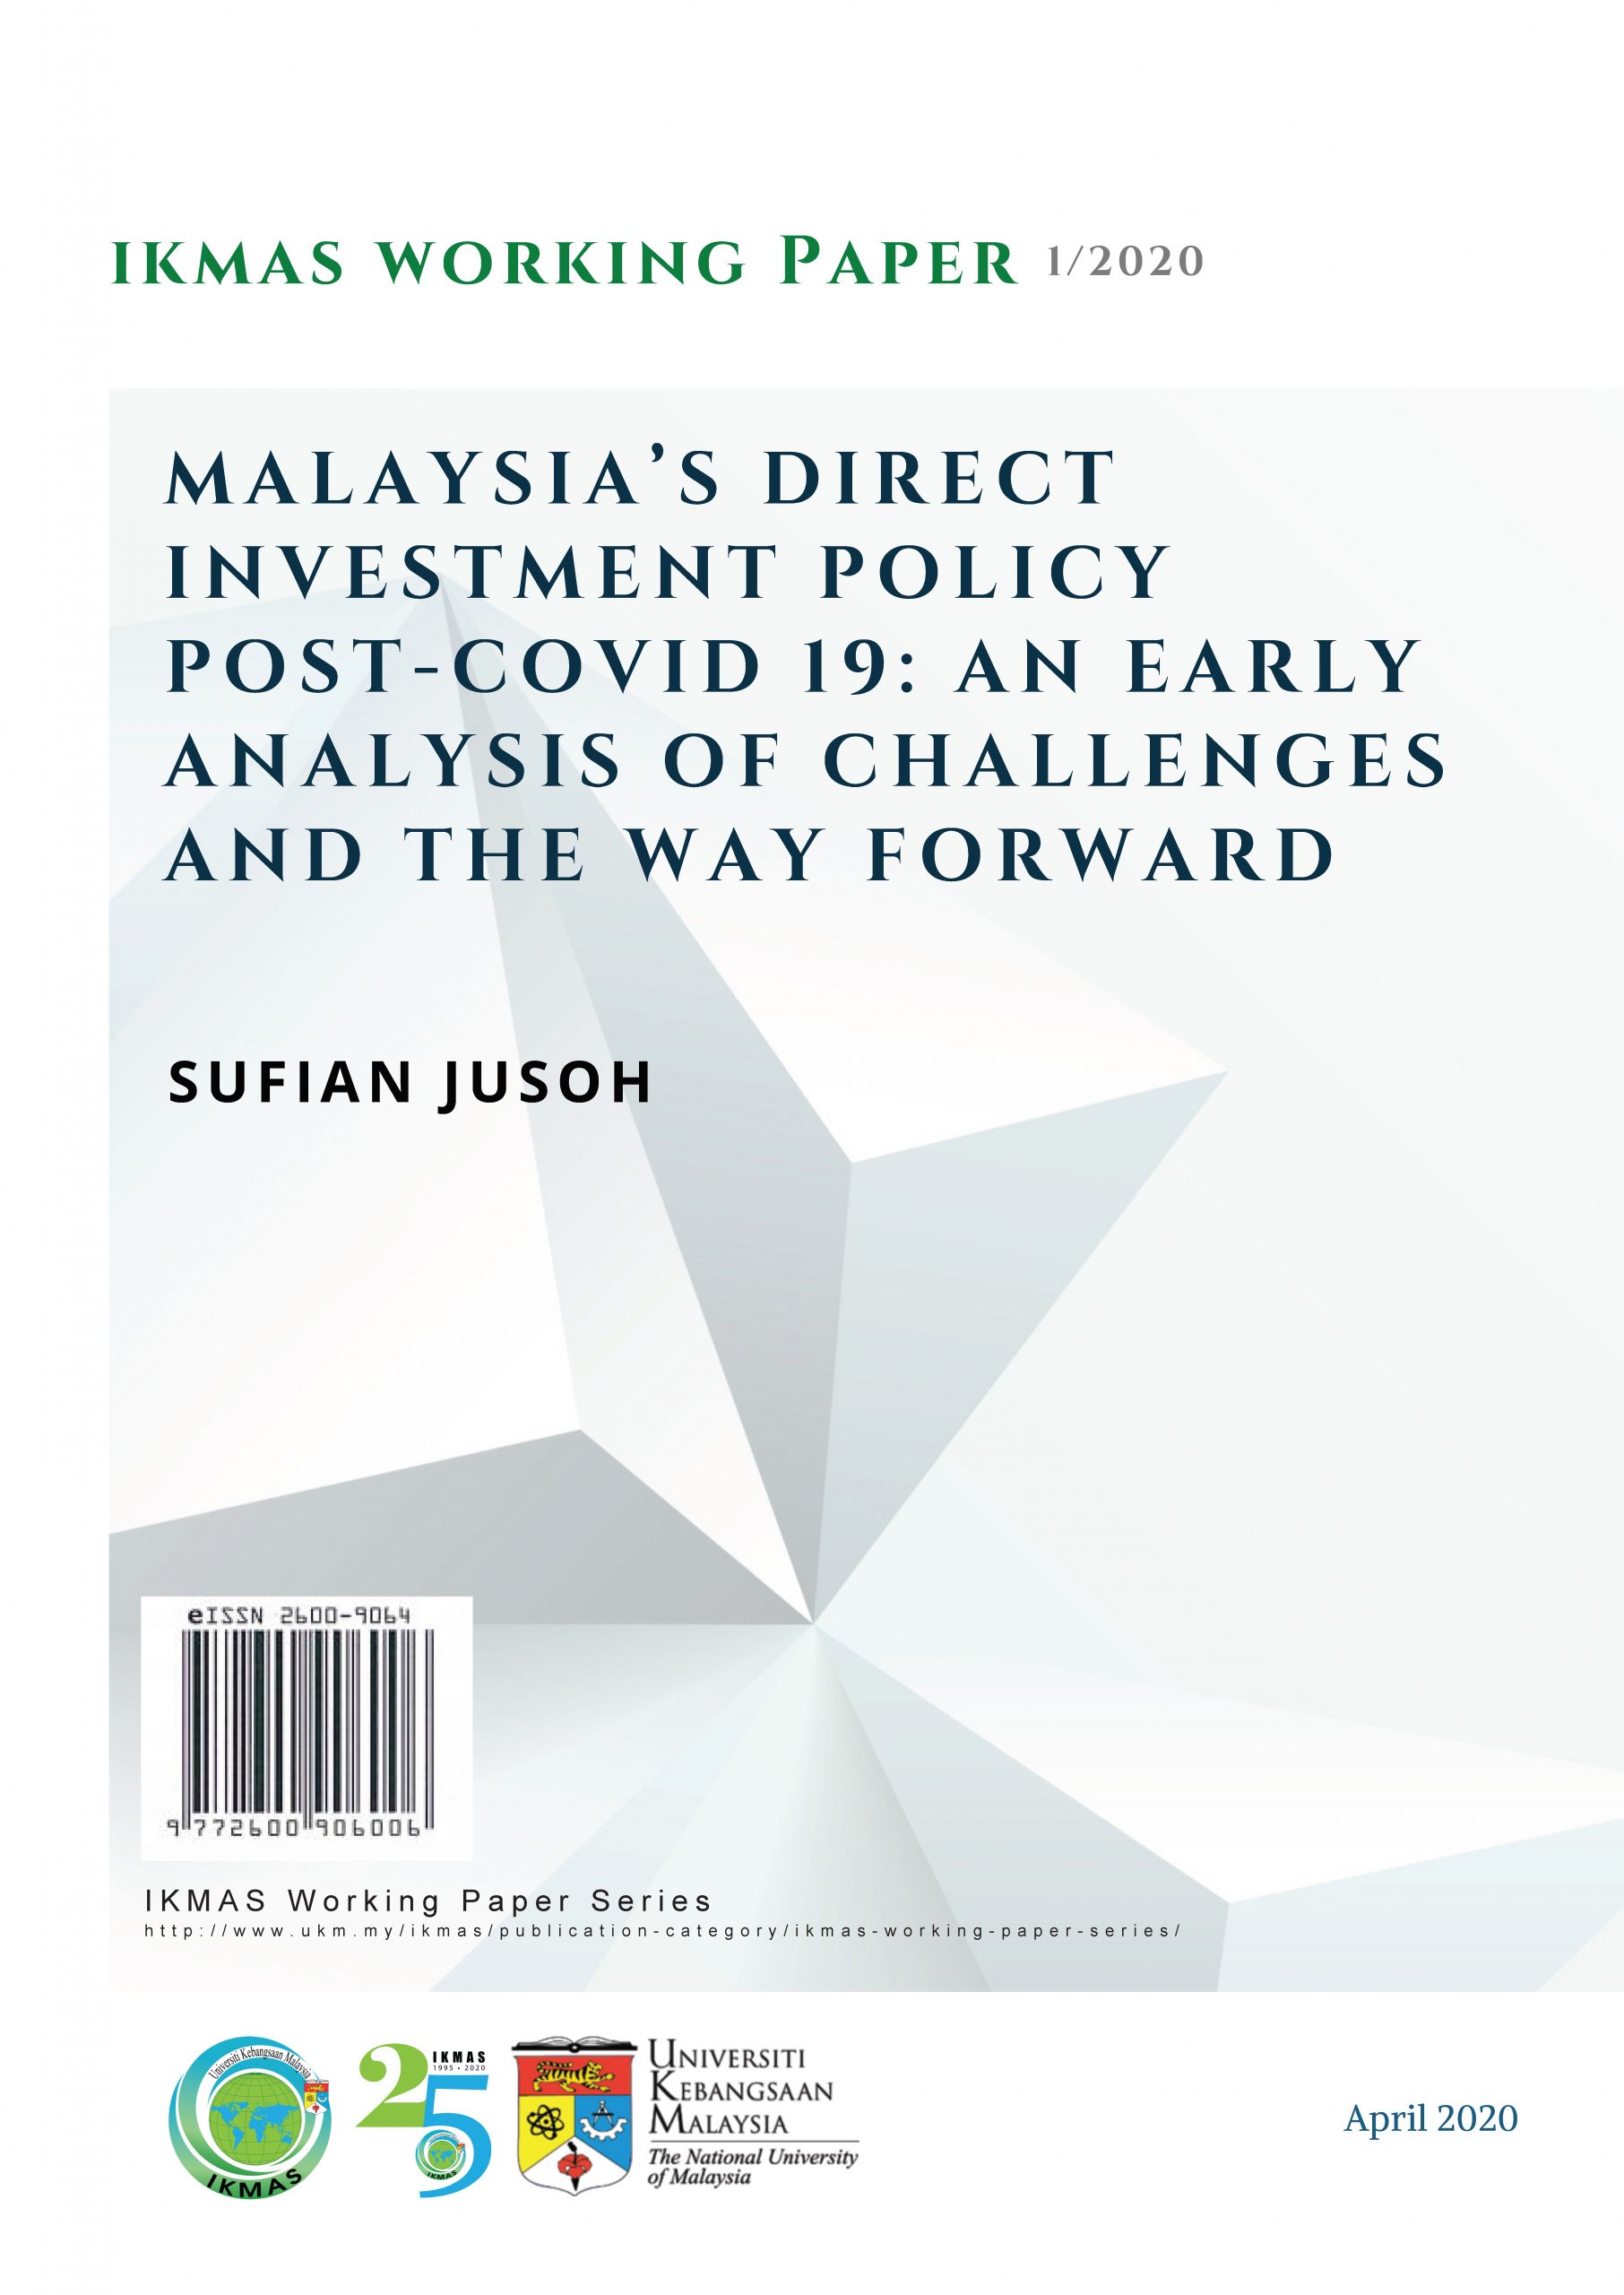 Malaysia’s Direct Investment Policy Post-Covid 19: An Early Analysis of Challenges and The Way Forward